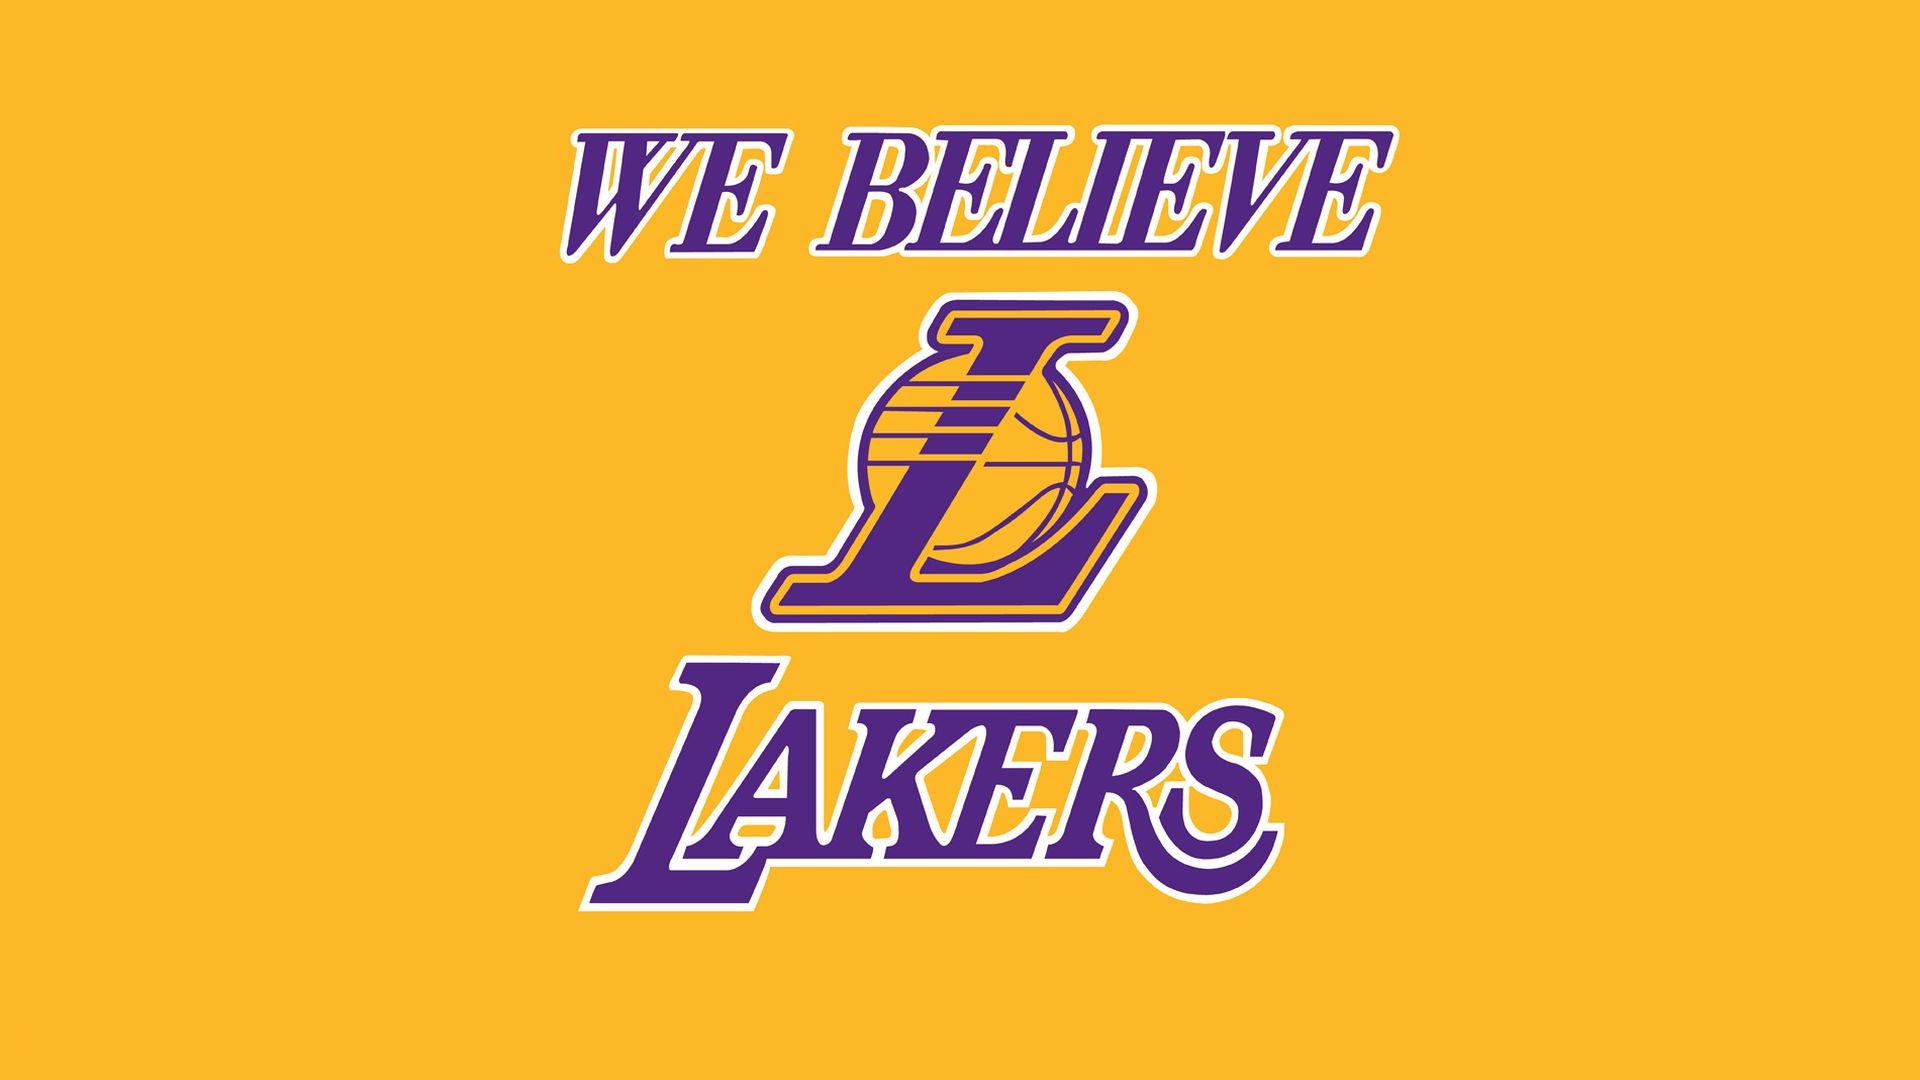 Windows Wallpaper Los Angeles Lakers with image dimensions 1920x1080 pixel. You can make this wallpaper for your Desktop Computer Backgrounds, Windows or Mac Screensavers, iPhone Lock screen, Tablet or Android and another Mobile Phone device